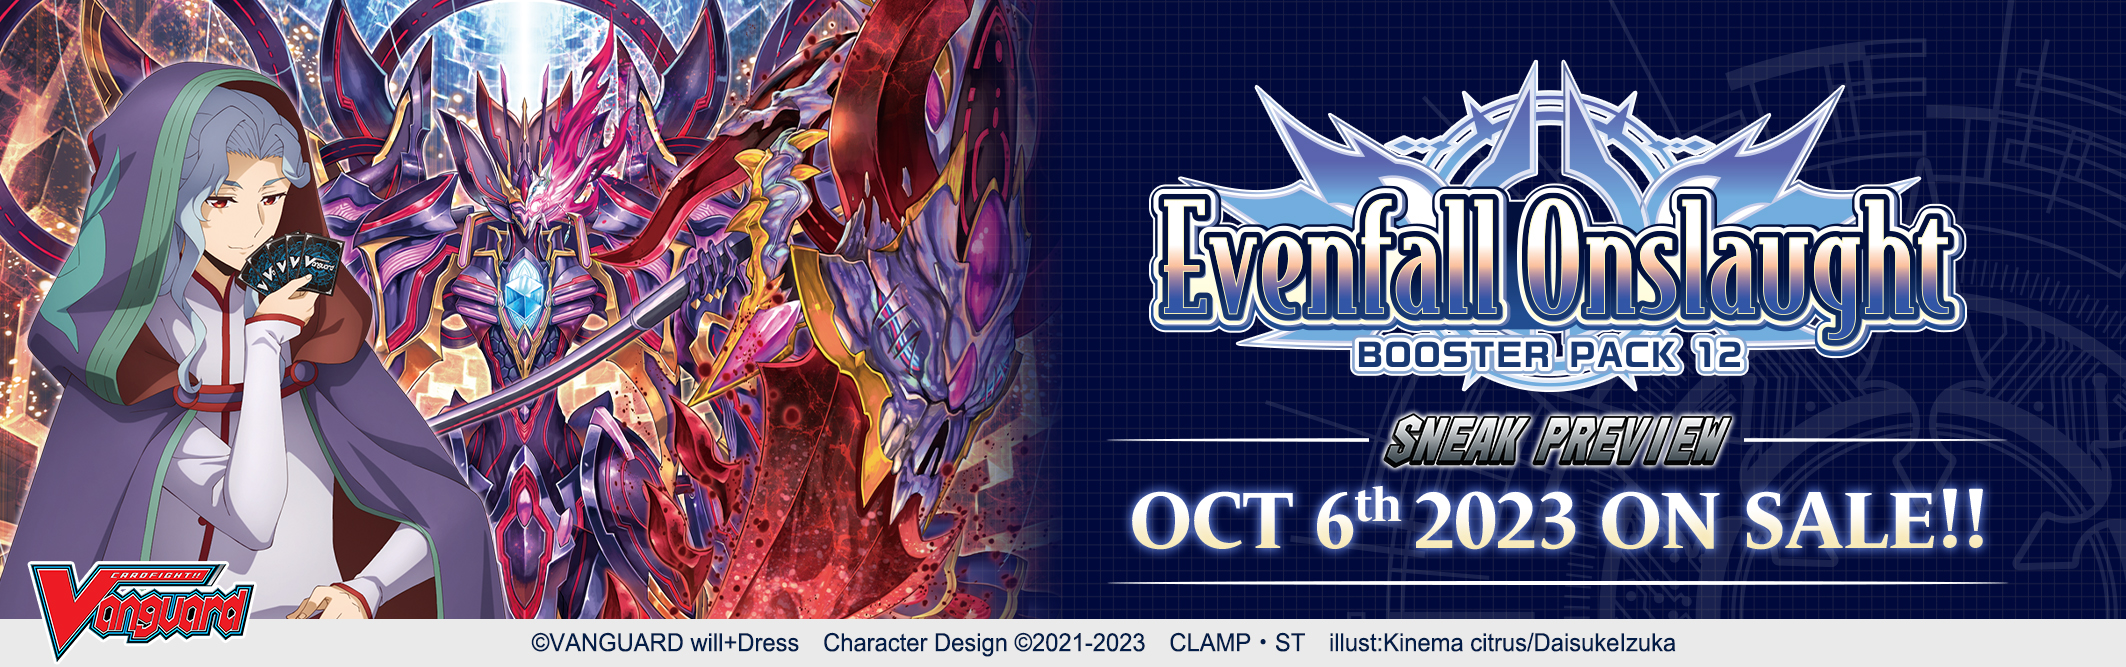 Cardfight!! Vanguard Booster Pack 12: Evenfall Onslaught Sneak Preview